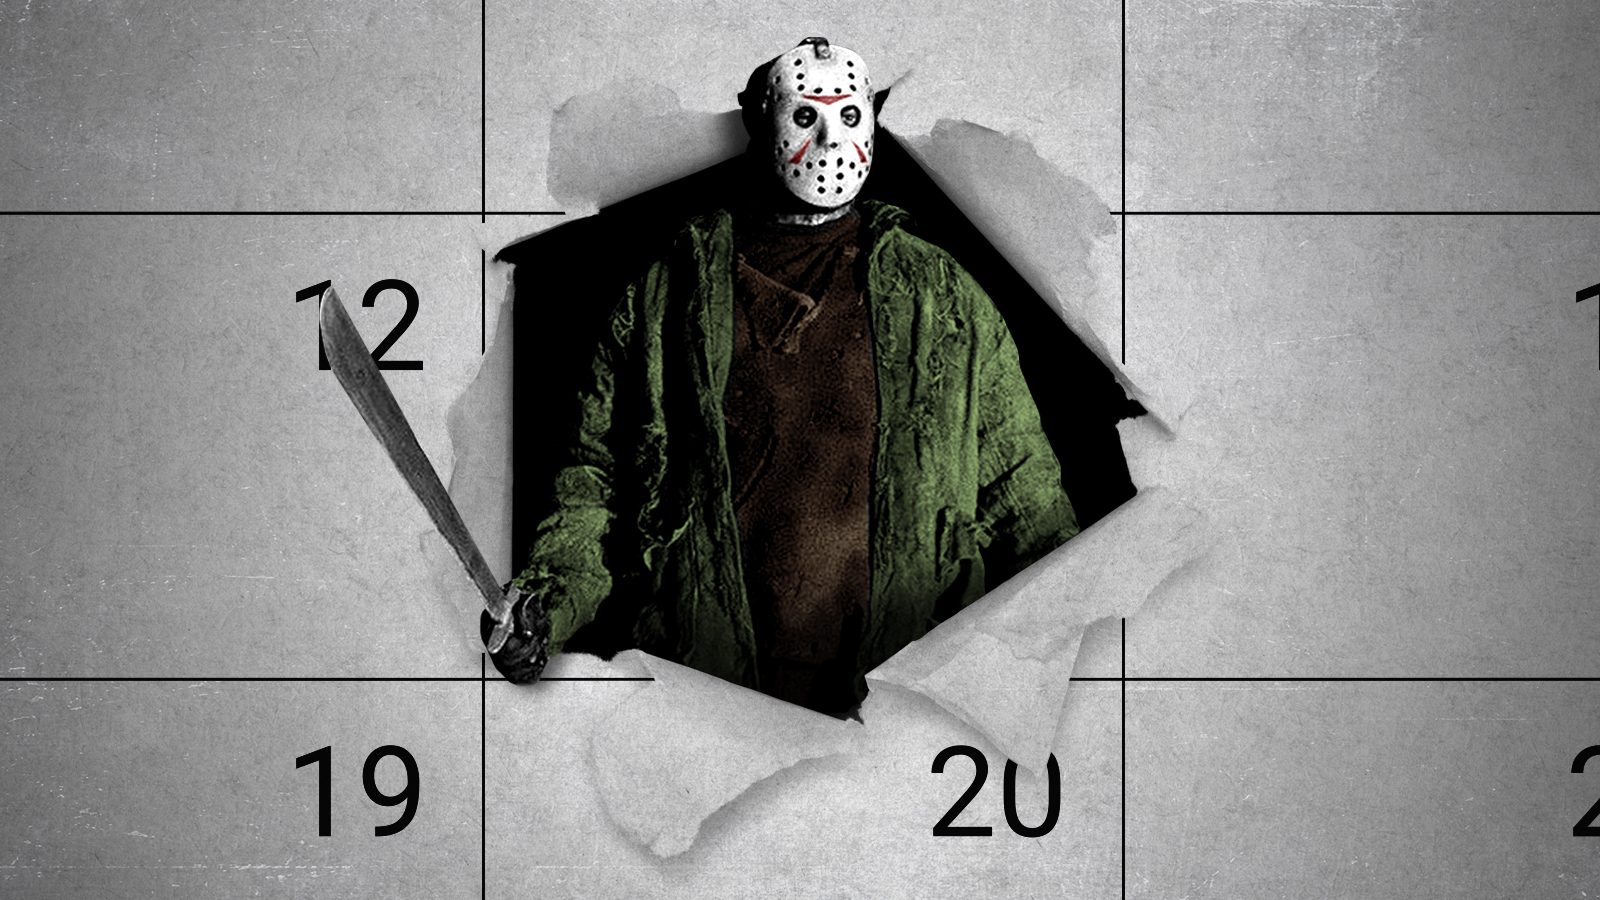 Friday the 13th Movies Ranked from Worst to Best